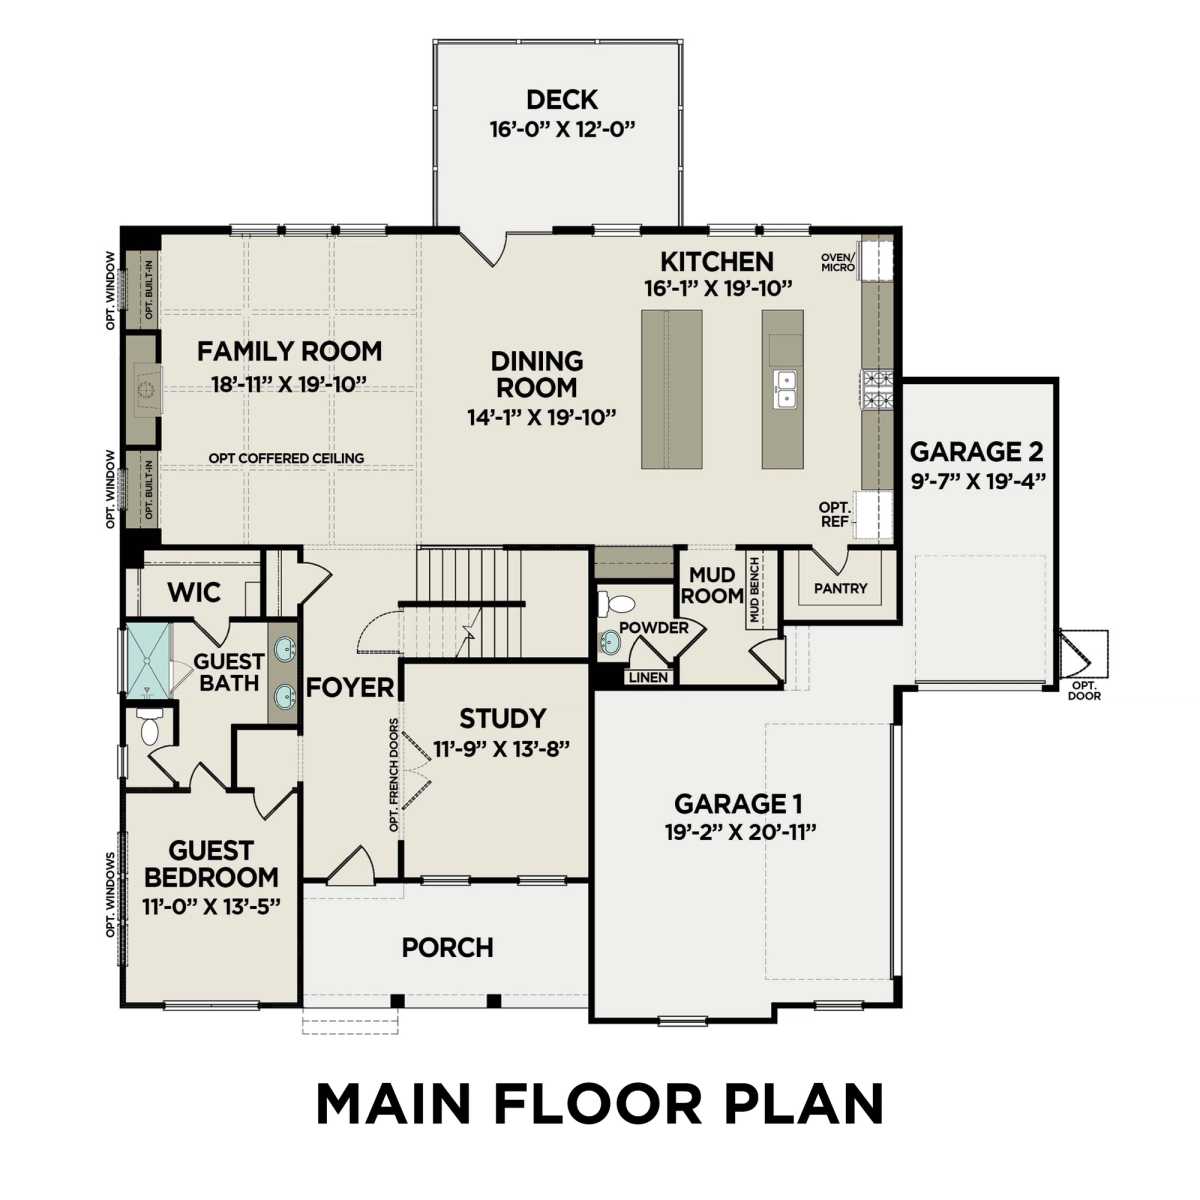 1 - The Arlington B floor plan layout for 2750 Twisted Oak Lane in Davidson Homes' Tanglewood community.